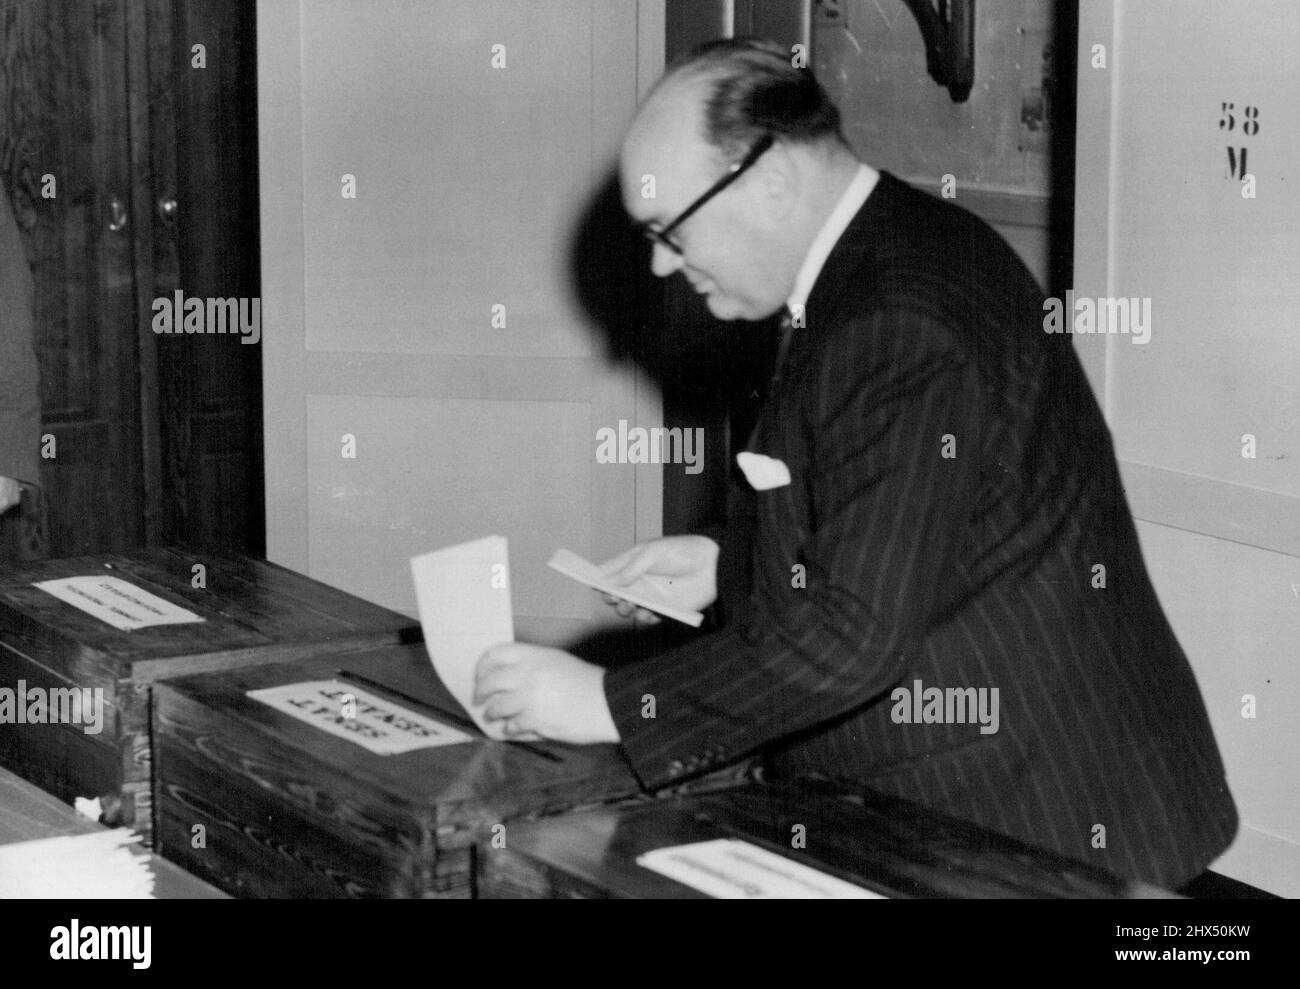 The Belgian Elections M. Spaak Records His Vote -- M. Paul-Henri Spaak, the Belgian Foreign Minister, as he records his vote during the elections.The fate and future of a King in the hands of the people of Belgium as they go to the pills to-day (Sunday).The main issue of the elections is the fight between the Christian-Social (Catholic) Party, and the socialists. The Liberals are siding with the Catholics for the return of exiled King Leopold III, and if these parties are returned with a sufficient majority, the question of the King's return will be put to a National reference *****.The Cathol Stock Photo